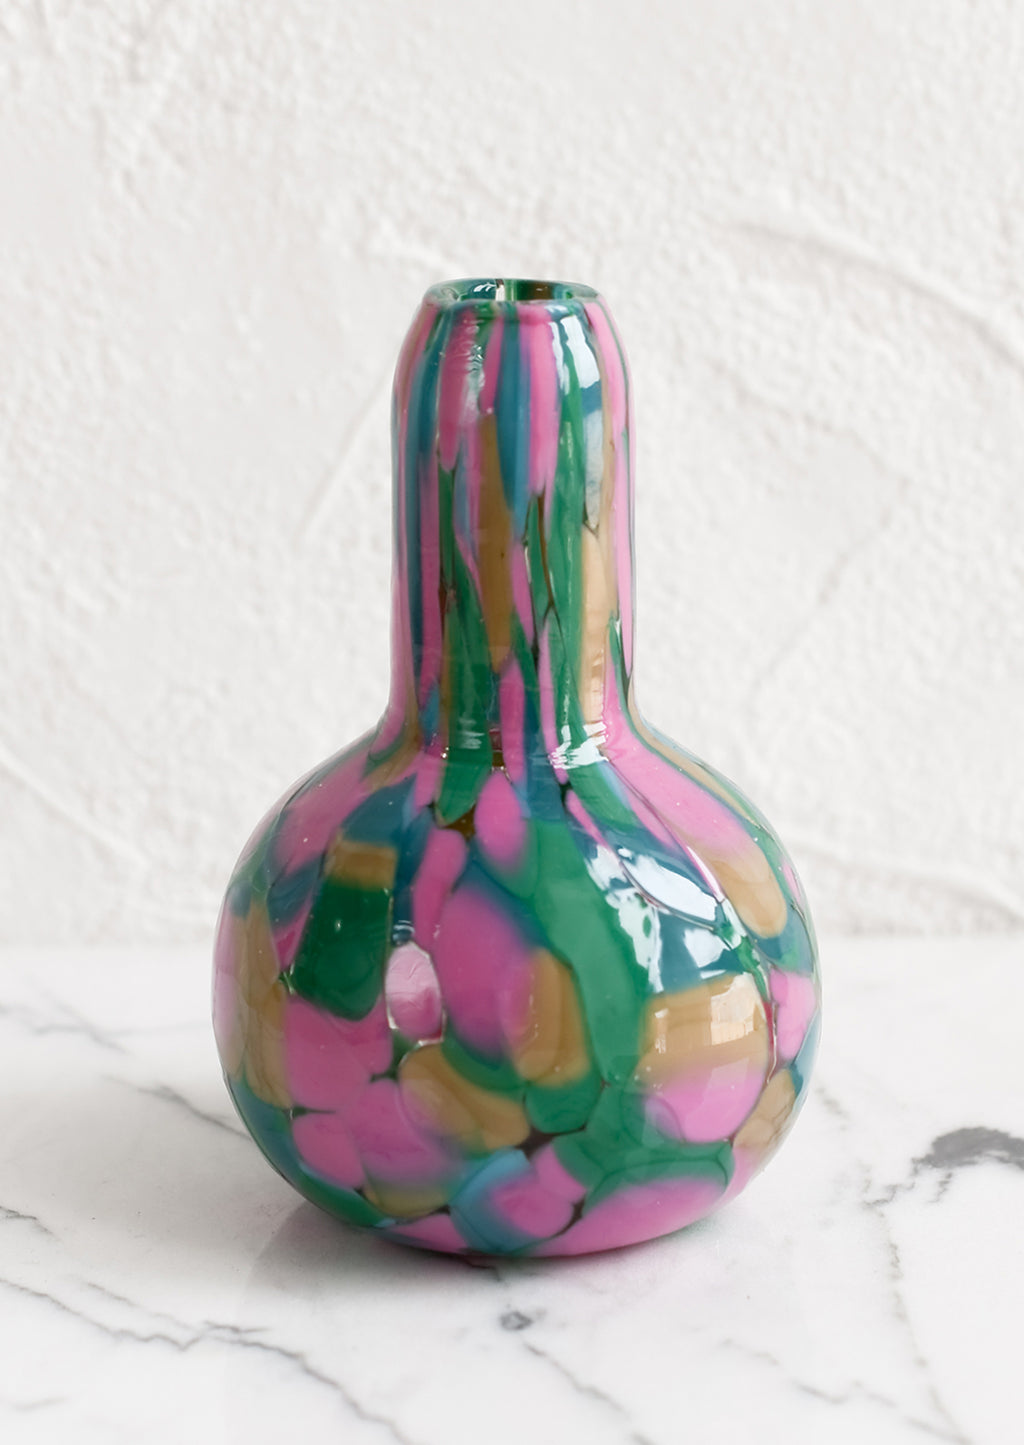 Gourd: A speckled glass vase in pink, teal and green palette.